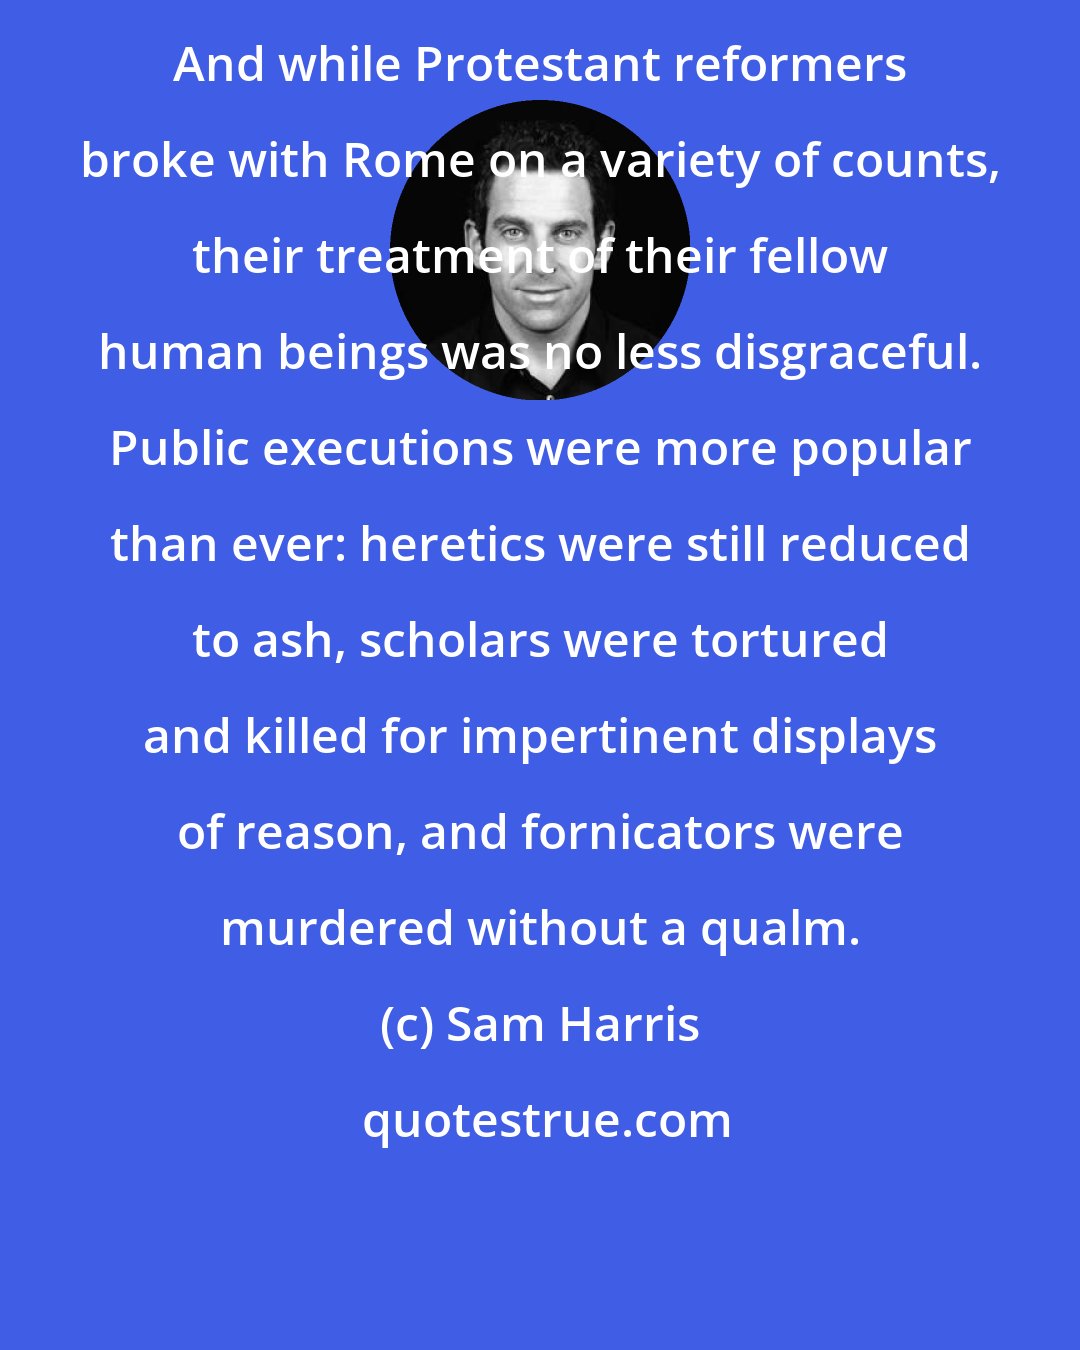 Sam Harris: And while Protestant reformers broke with Rome on a variety of counts, their treatment of their fellow human beings was no less disgraceful. Public executions were more popular than ever: heretics were still reduced to ash, scholars were tortured and killed for impertinent displays of reason, and fornicators were murdered without a qualm.